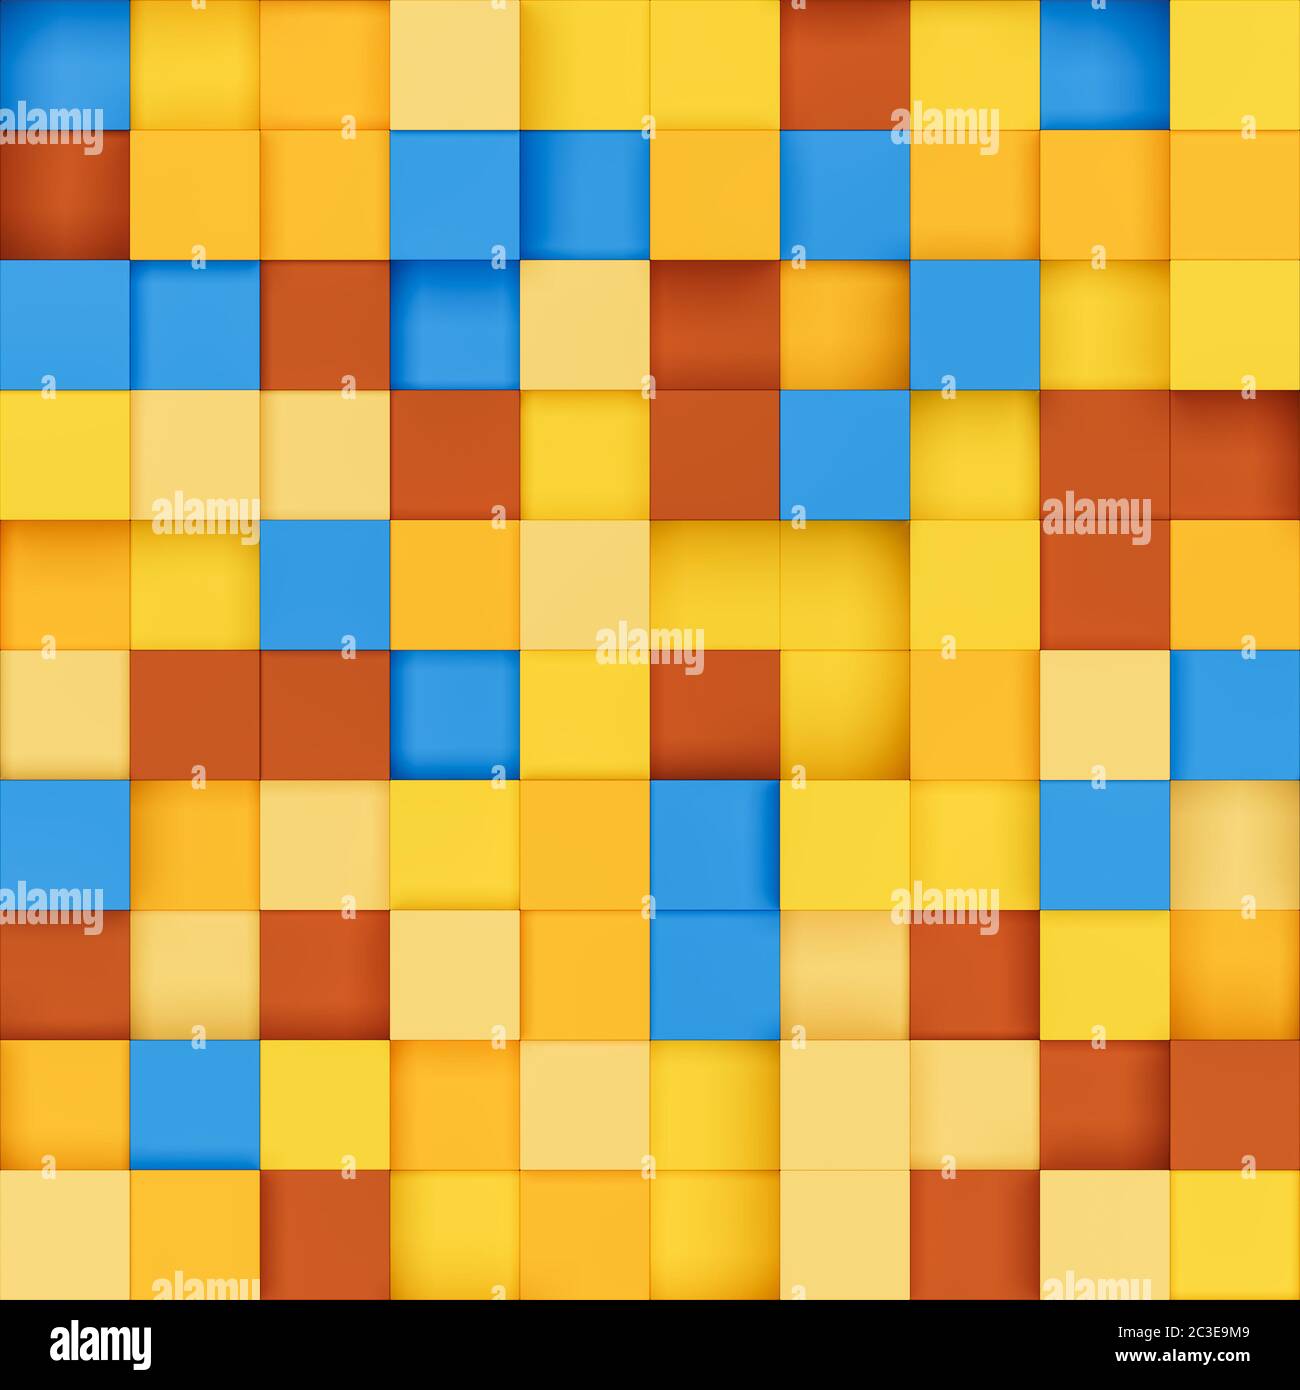 Seamless tile of colored isometric boxes with shadows in a blue yellow orange brown color scheme Stock Photo